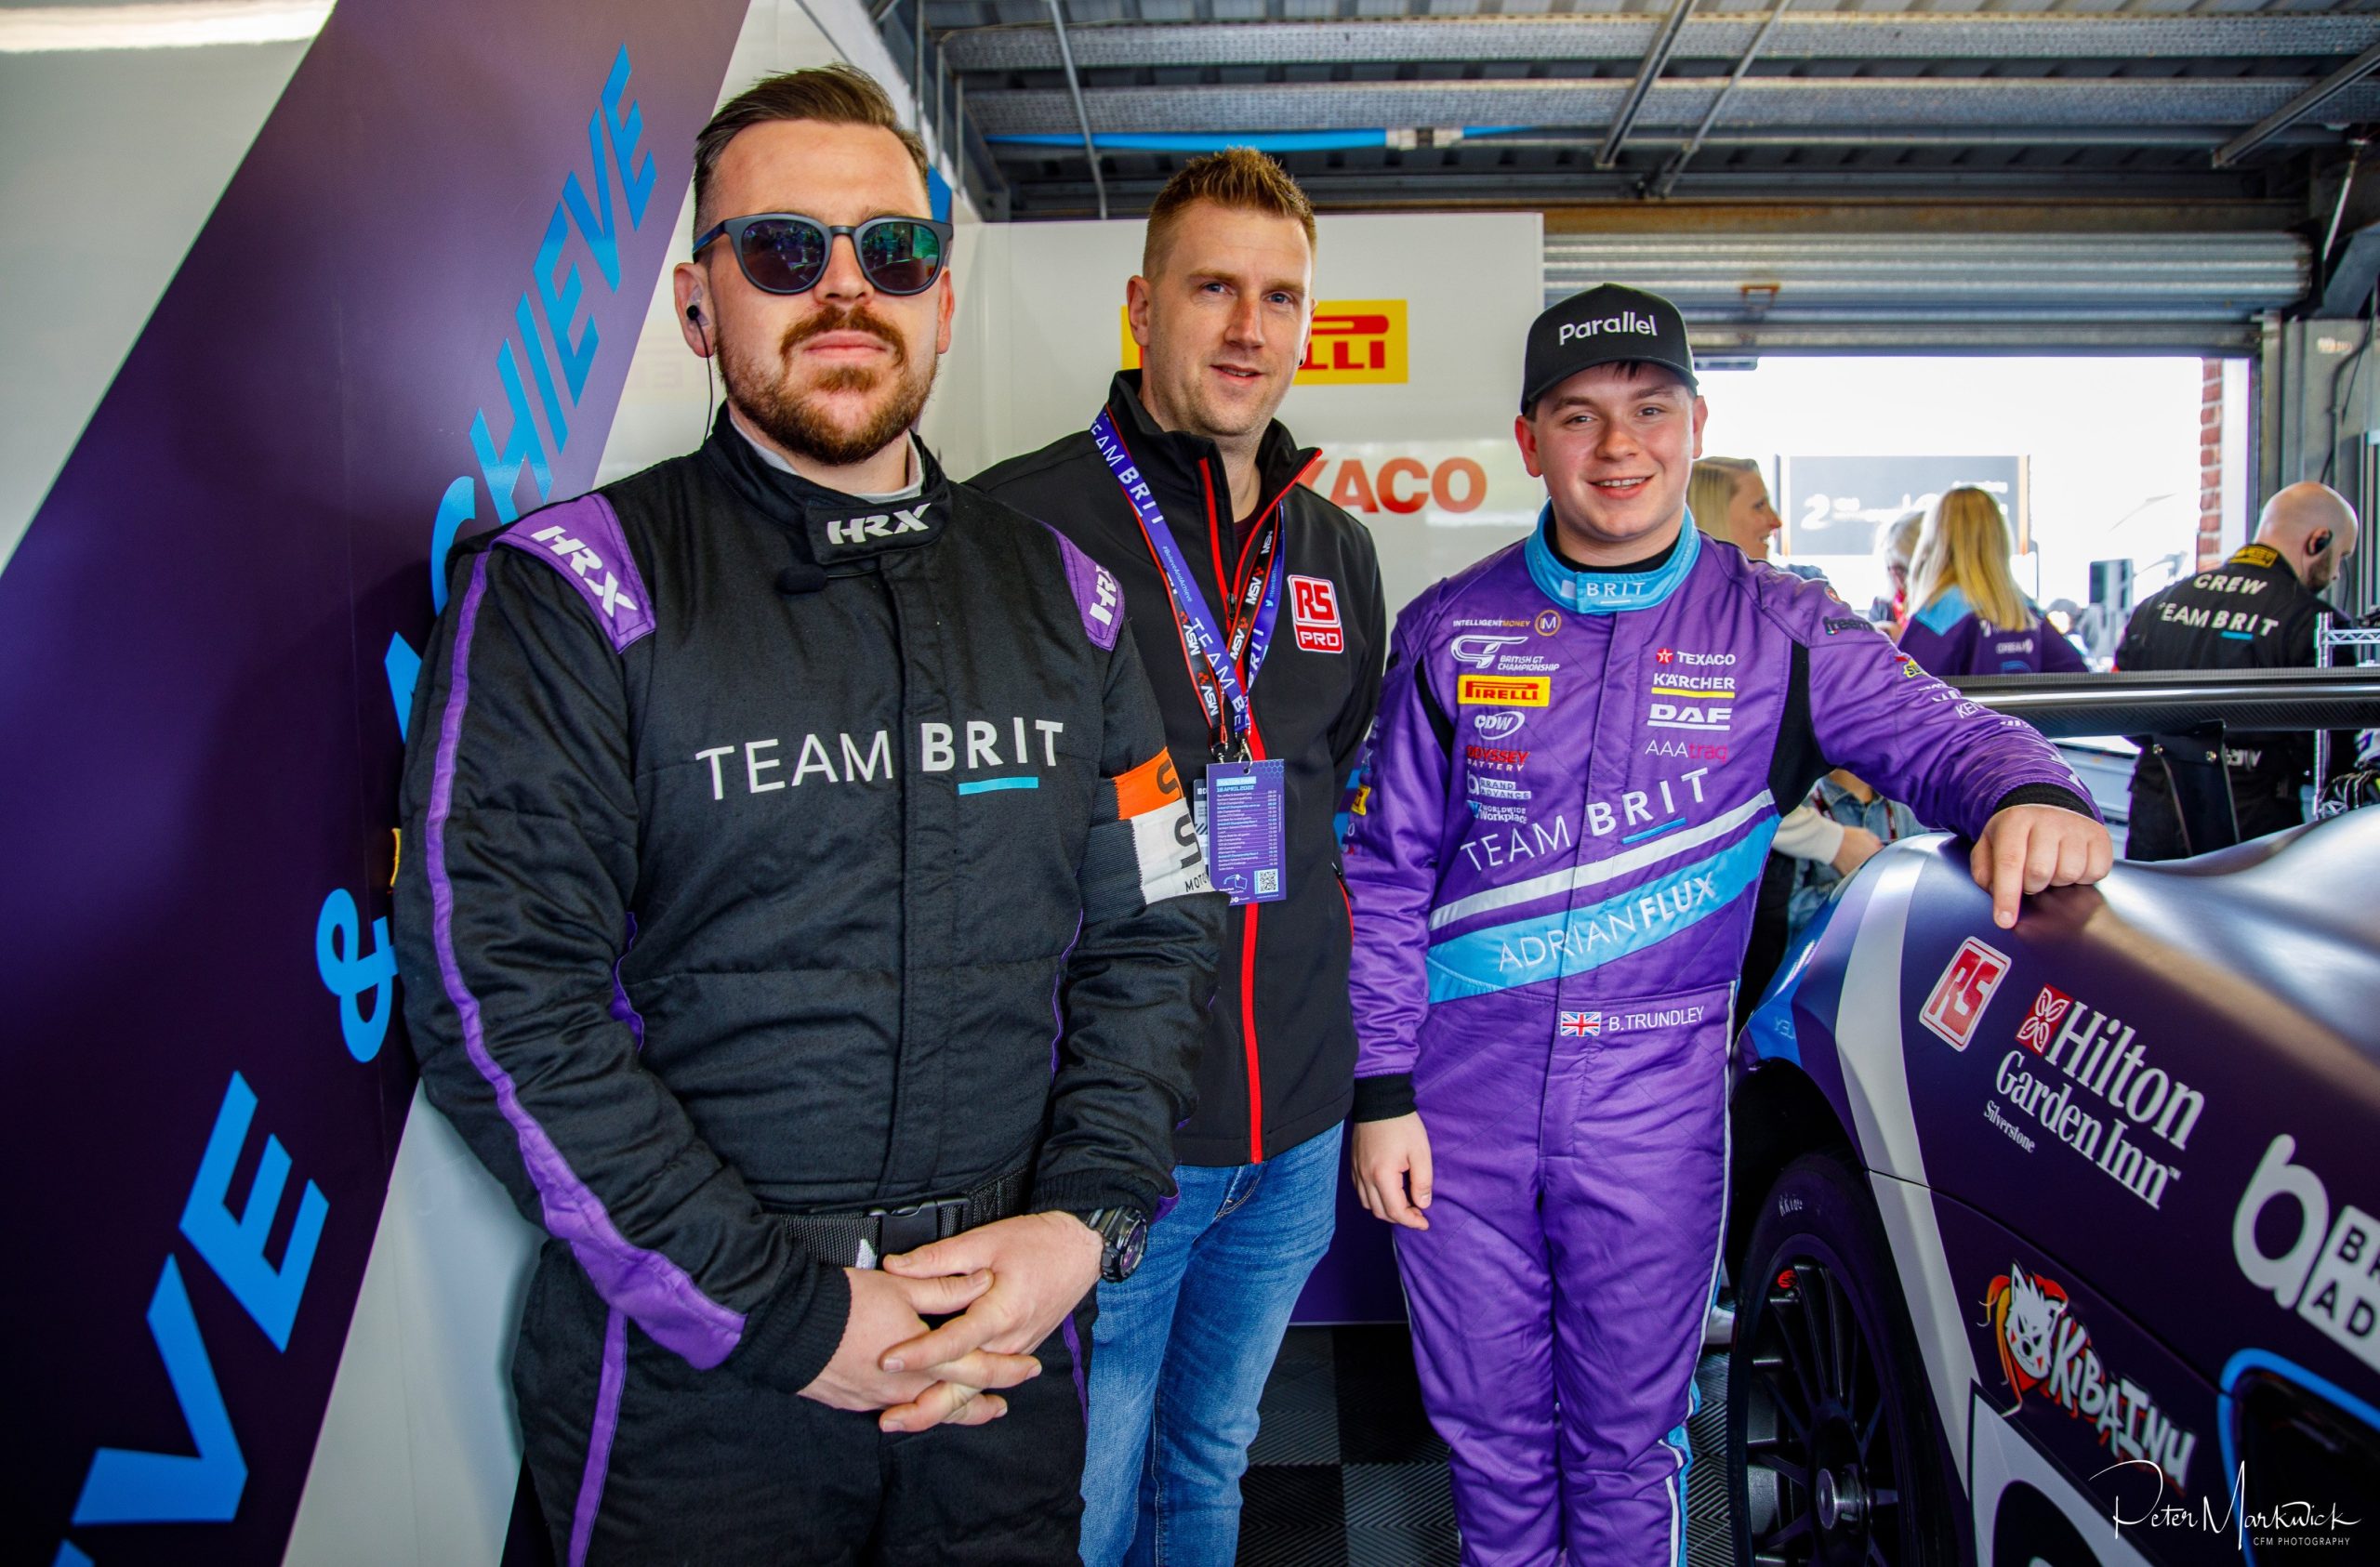 RS champions access to motorsport with sponsorship of Team BRIT